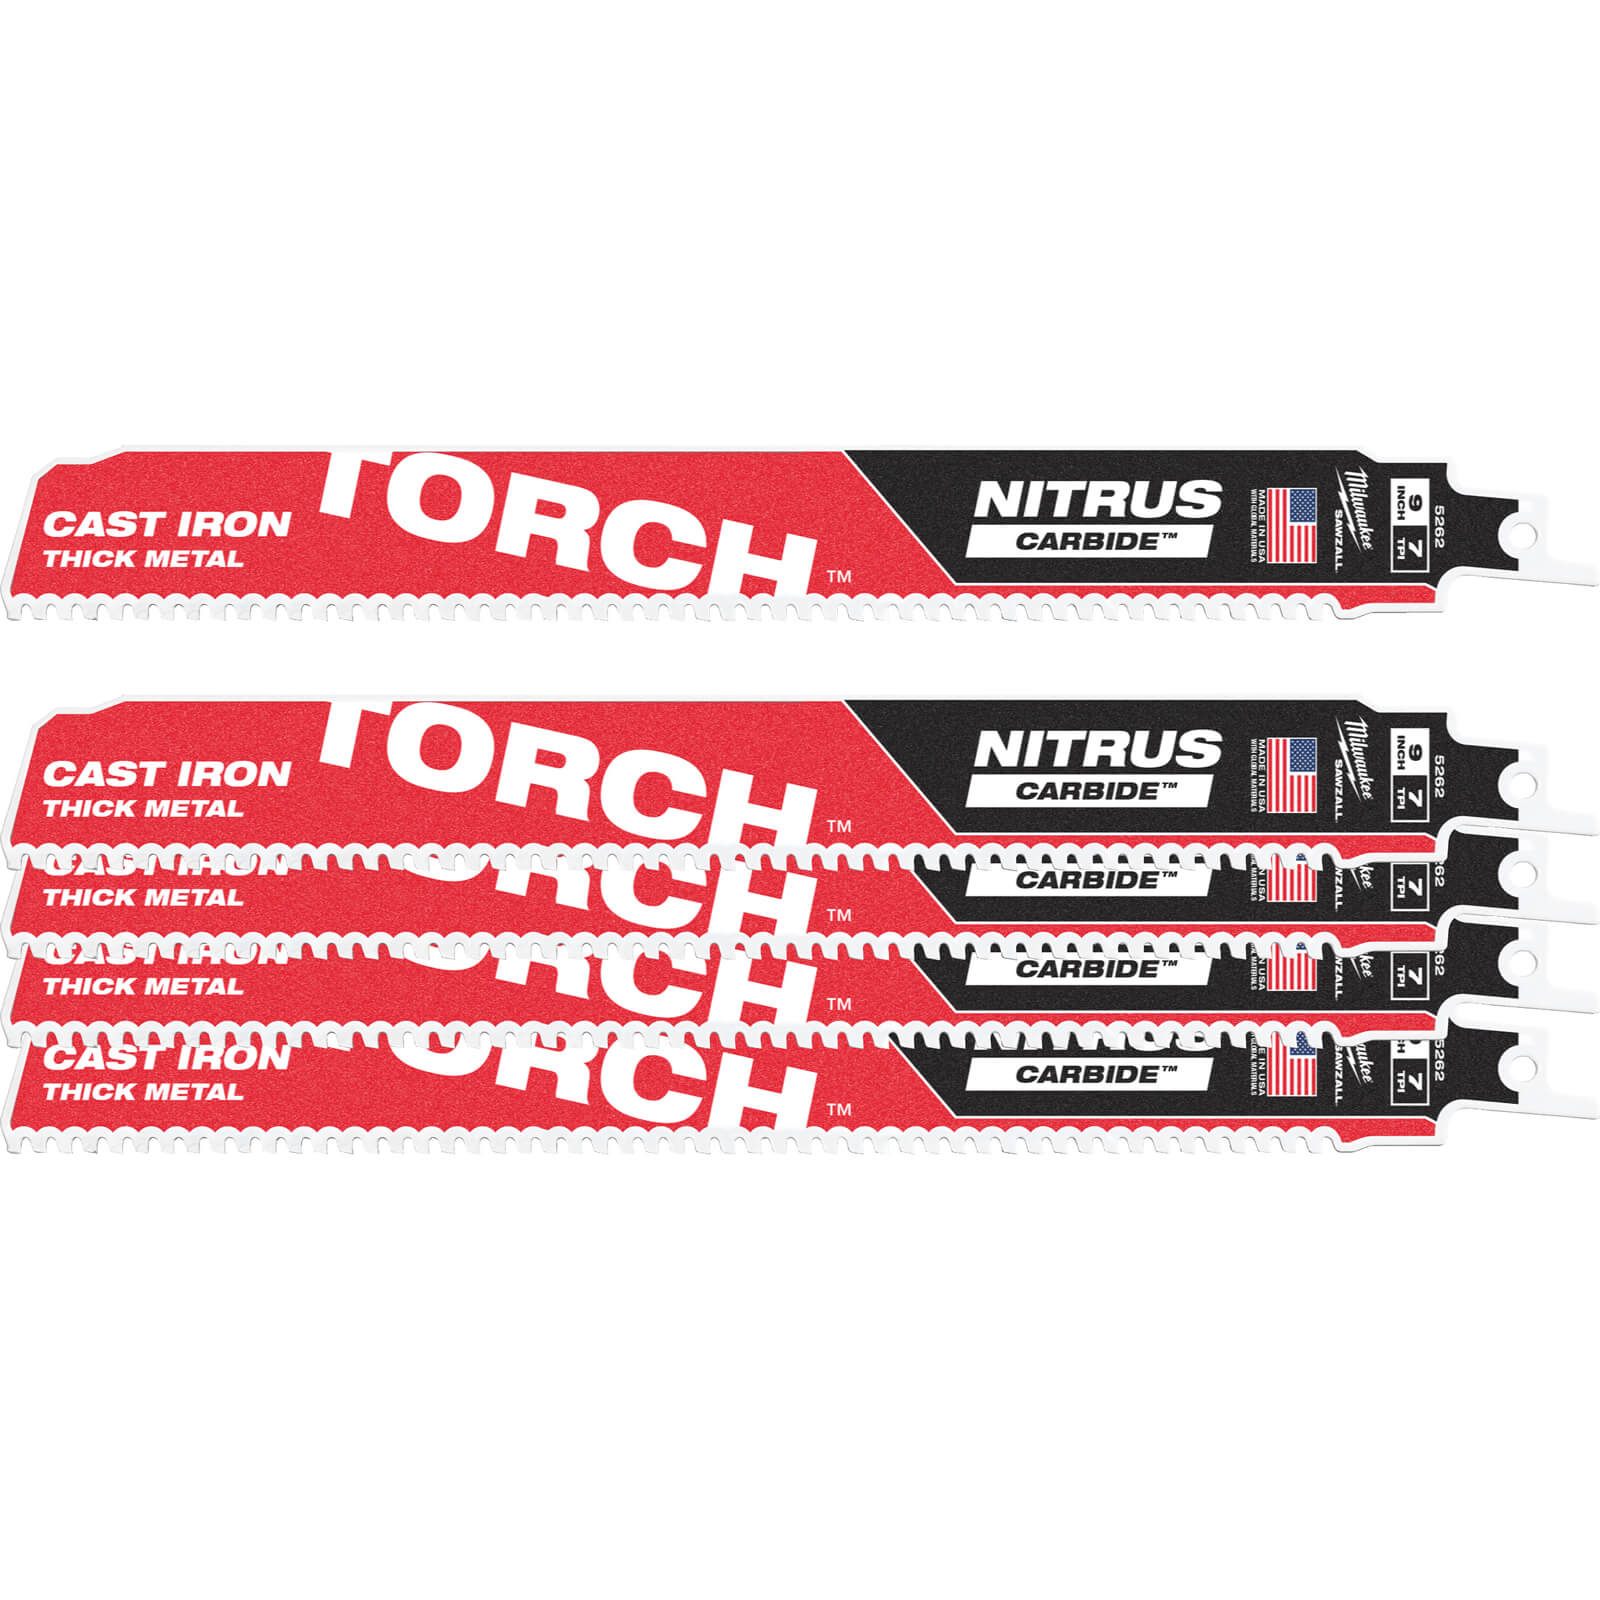 Image of Milwaukee Heavy Duty TORCH Nitrus Carbide Reciprocating Sabre Saw Blades 230mm Pack of 5